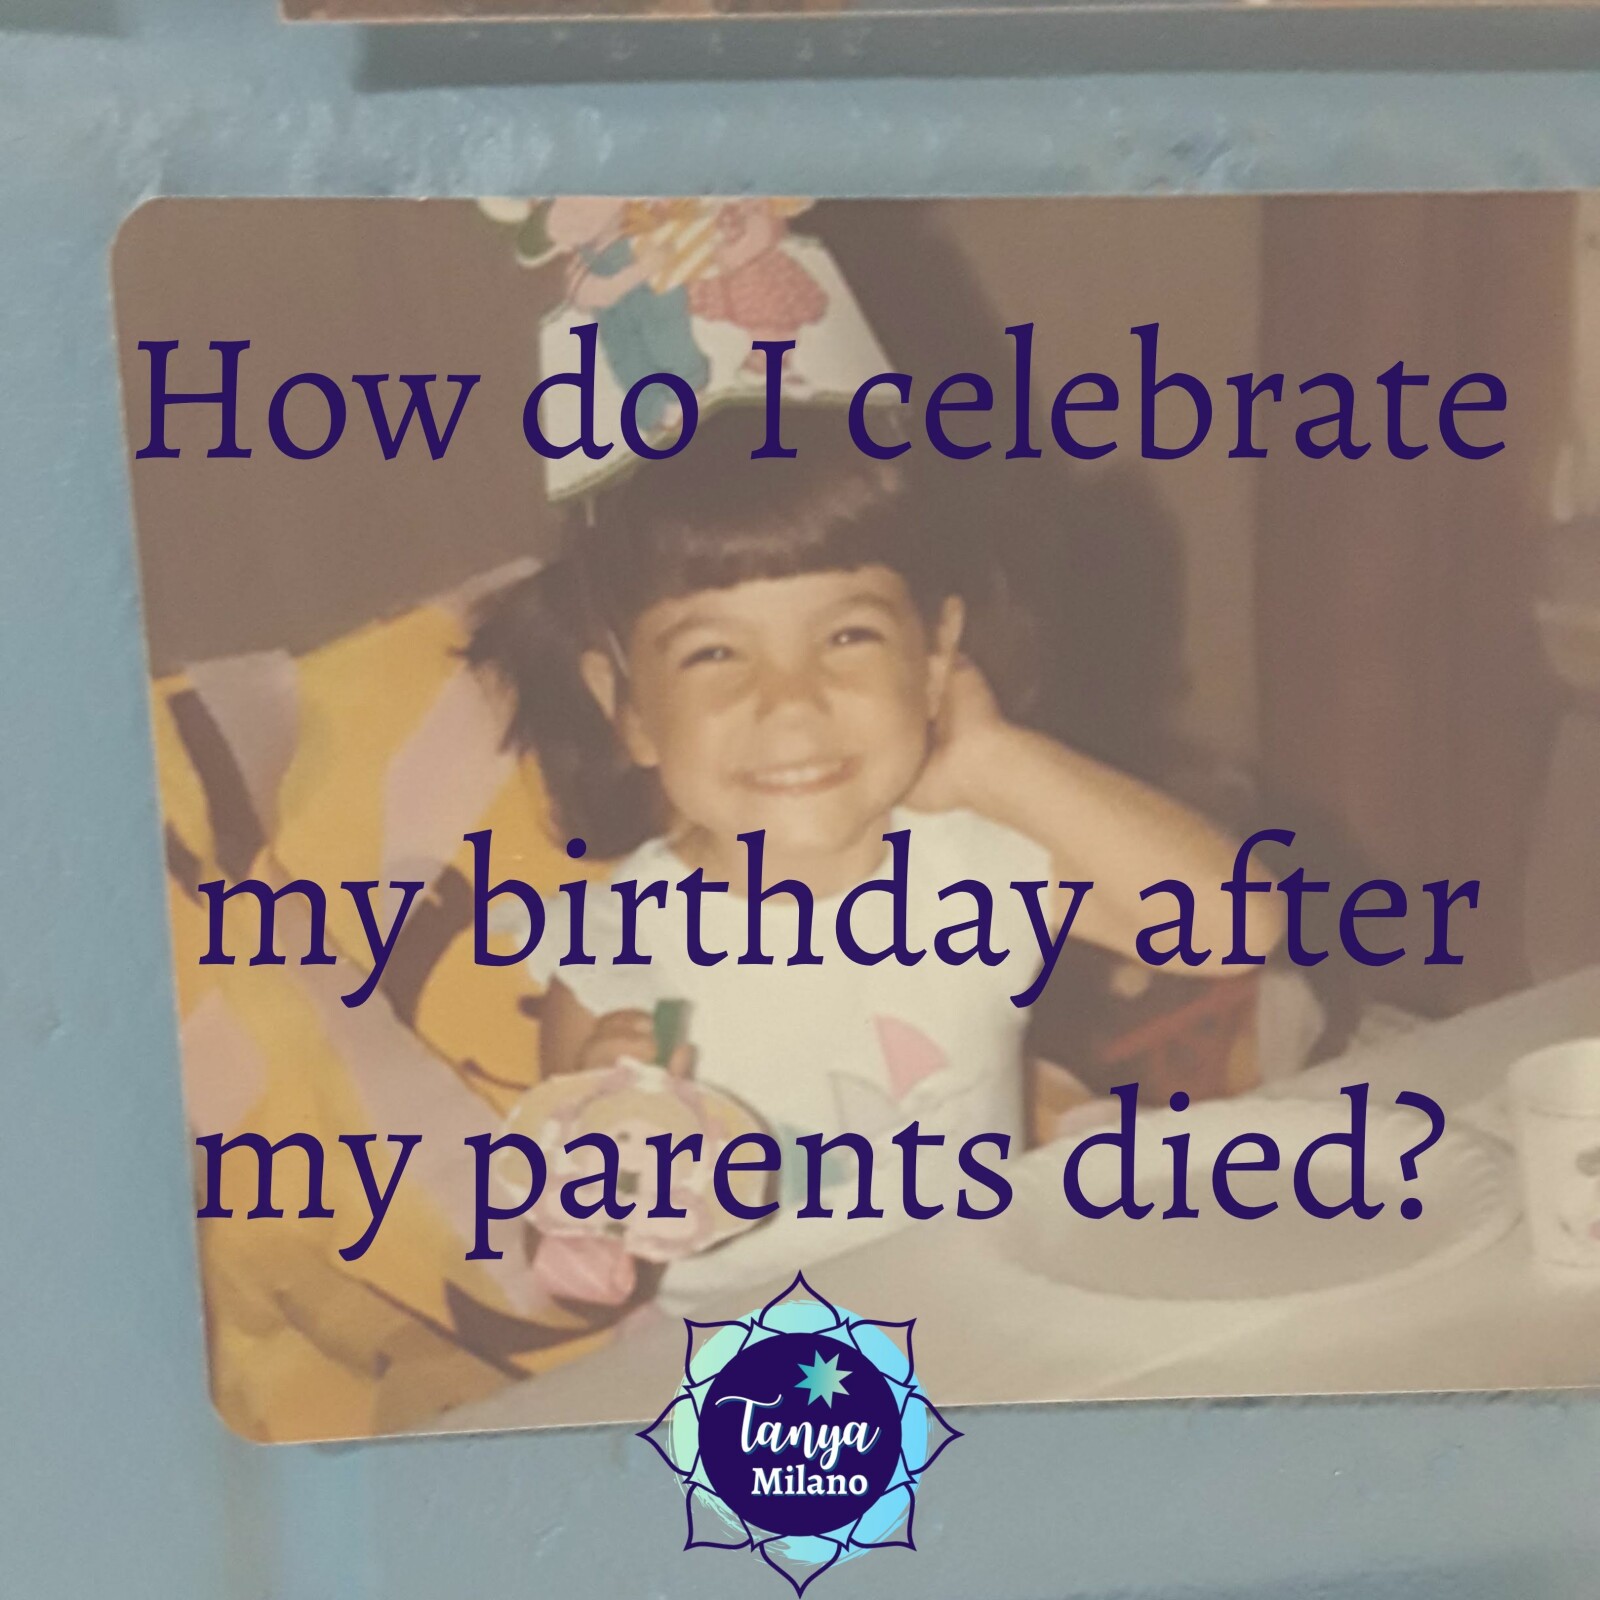 How do I celebrate my birthday after my parents died?